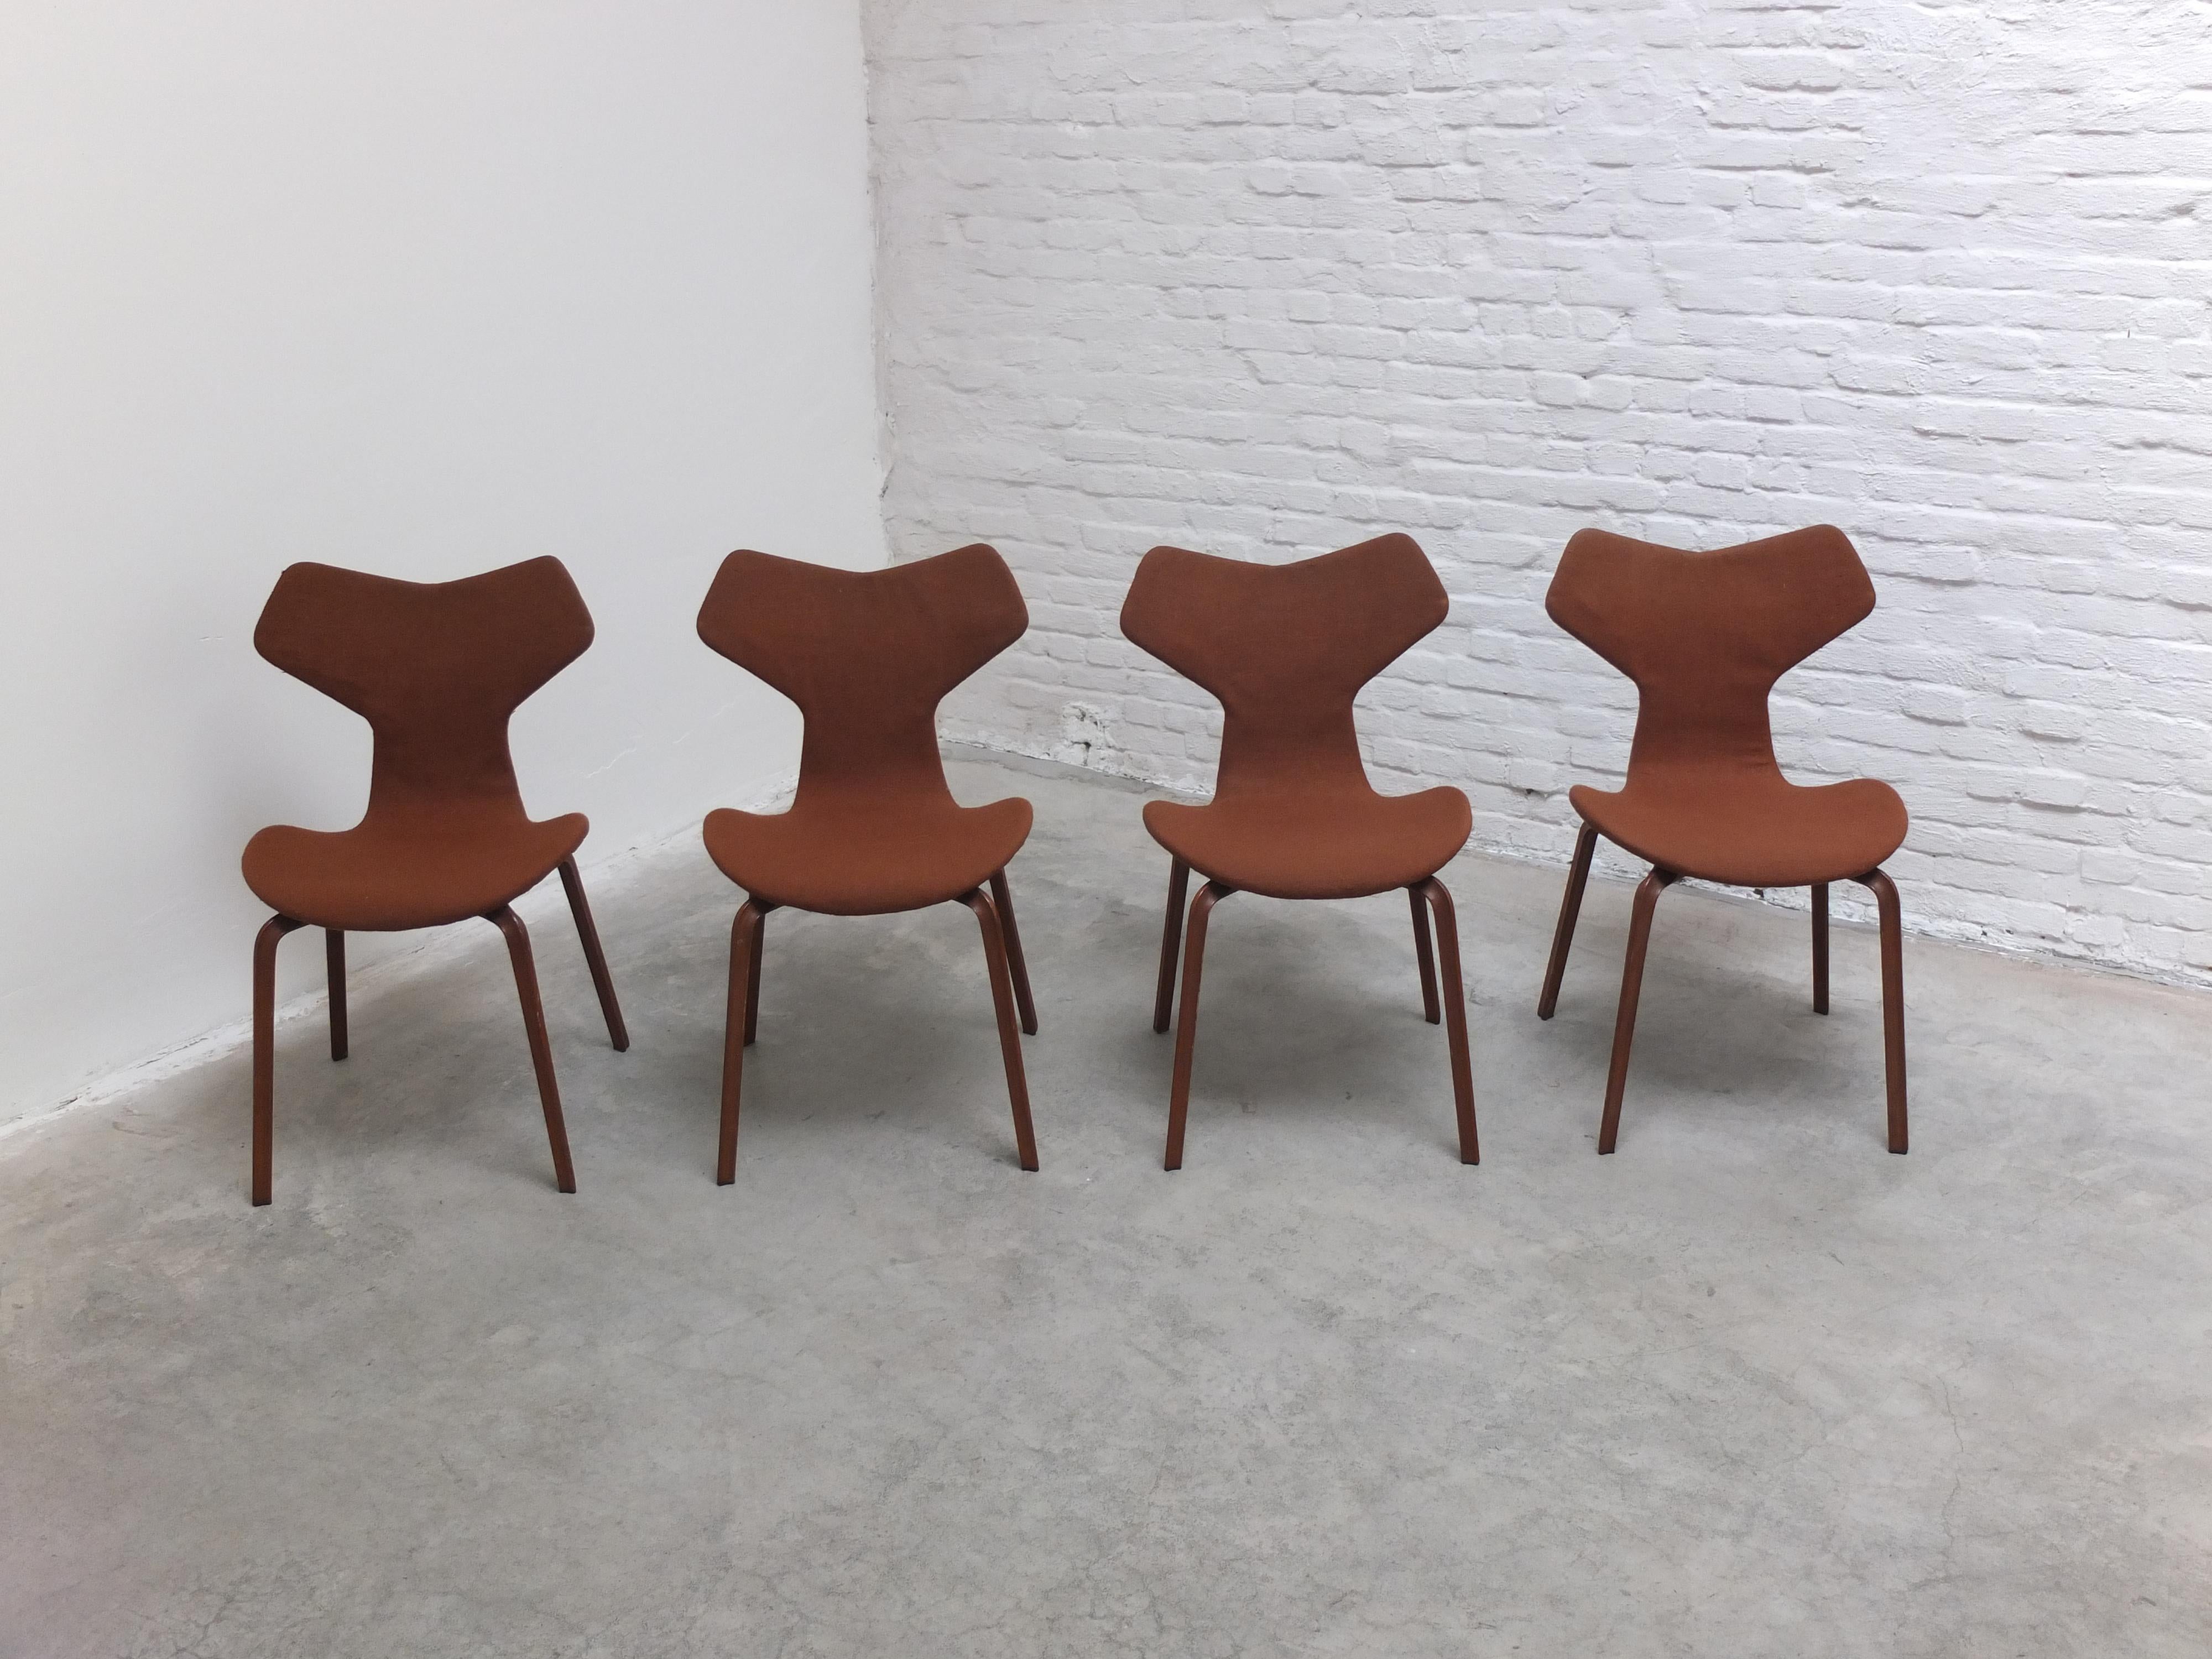 Exceptional set of 4 ‘Grand Prix’ chairs designed by Arne Jacobsen for Fritz Hansen in 1957. During that year, the chair was displayed at the Triennale in Milan where it received the Grand Prix, the finest distinction of the exhibition. These chairs